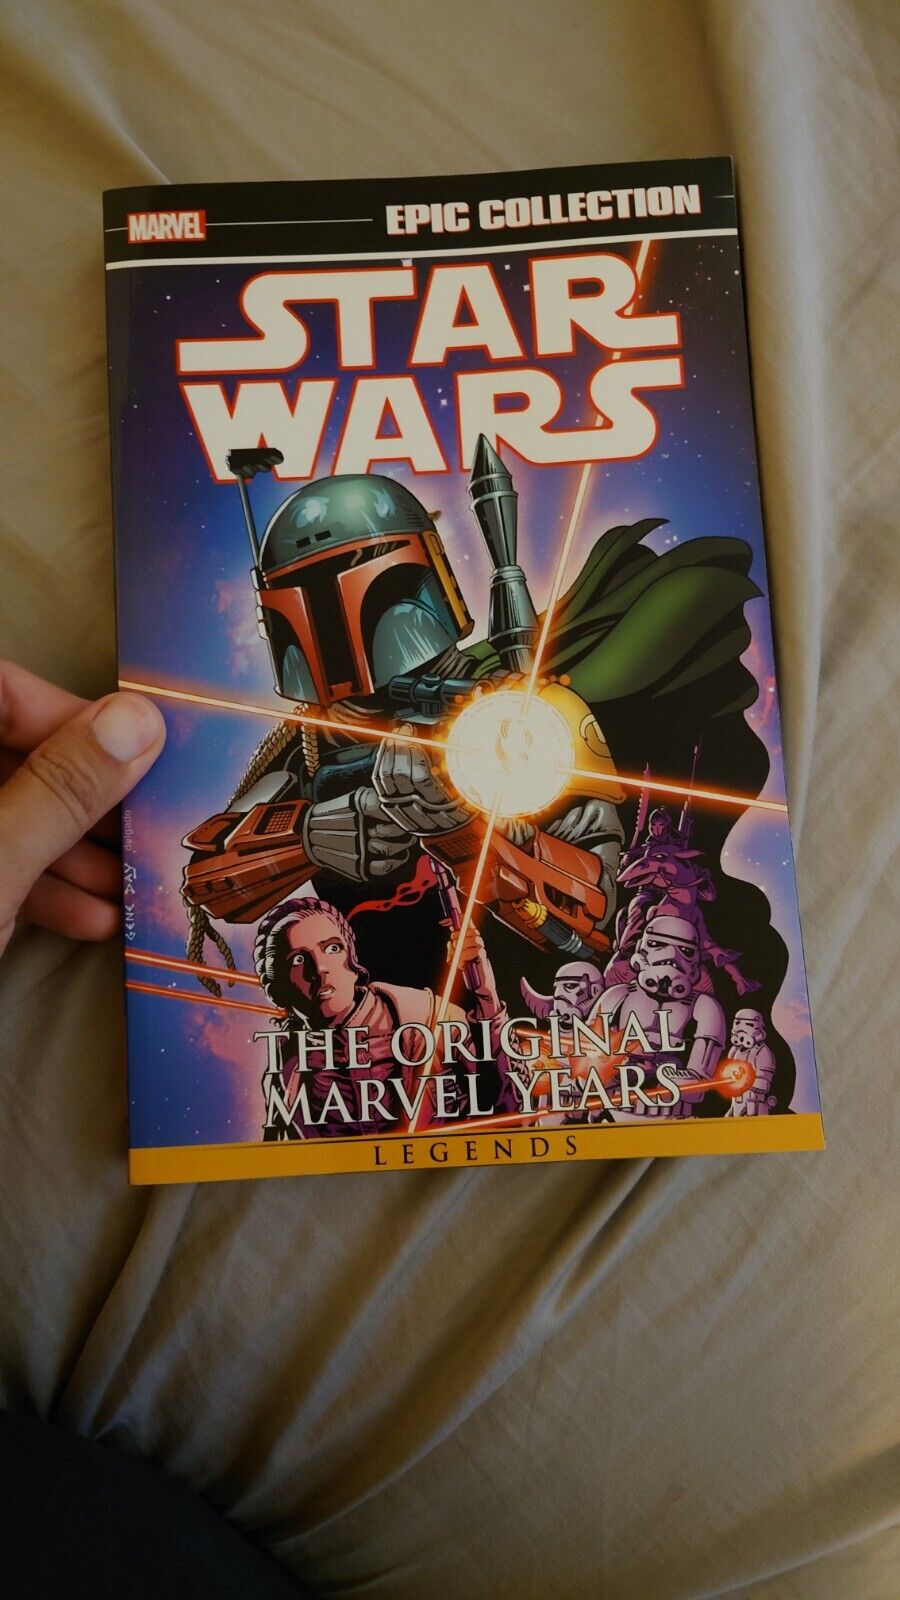 Marvel Epic Collection Star Wars The Original Marvel Years Volume 4 TPB RARE OOP